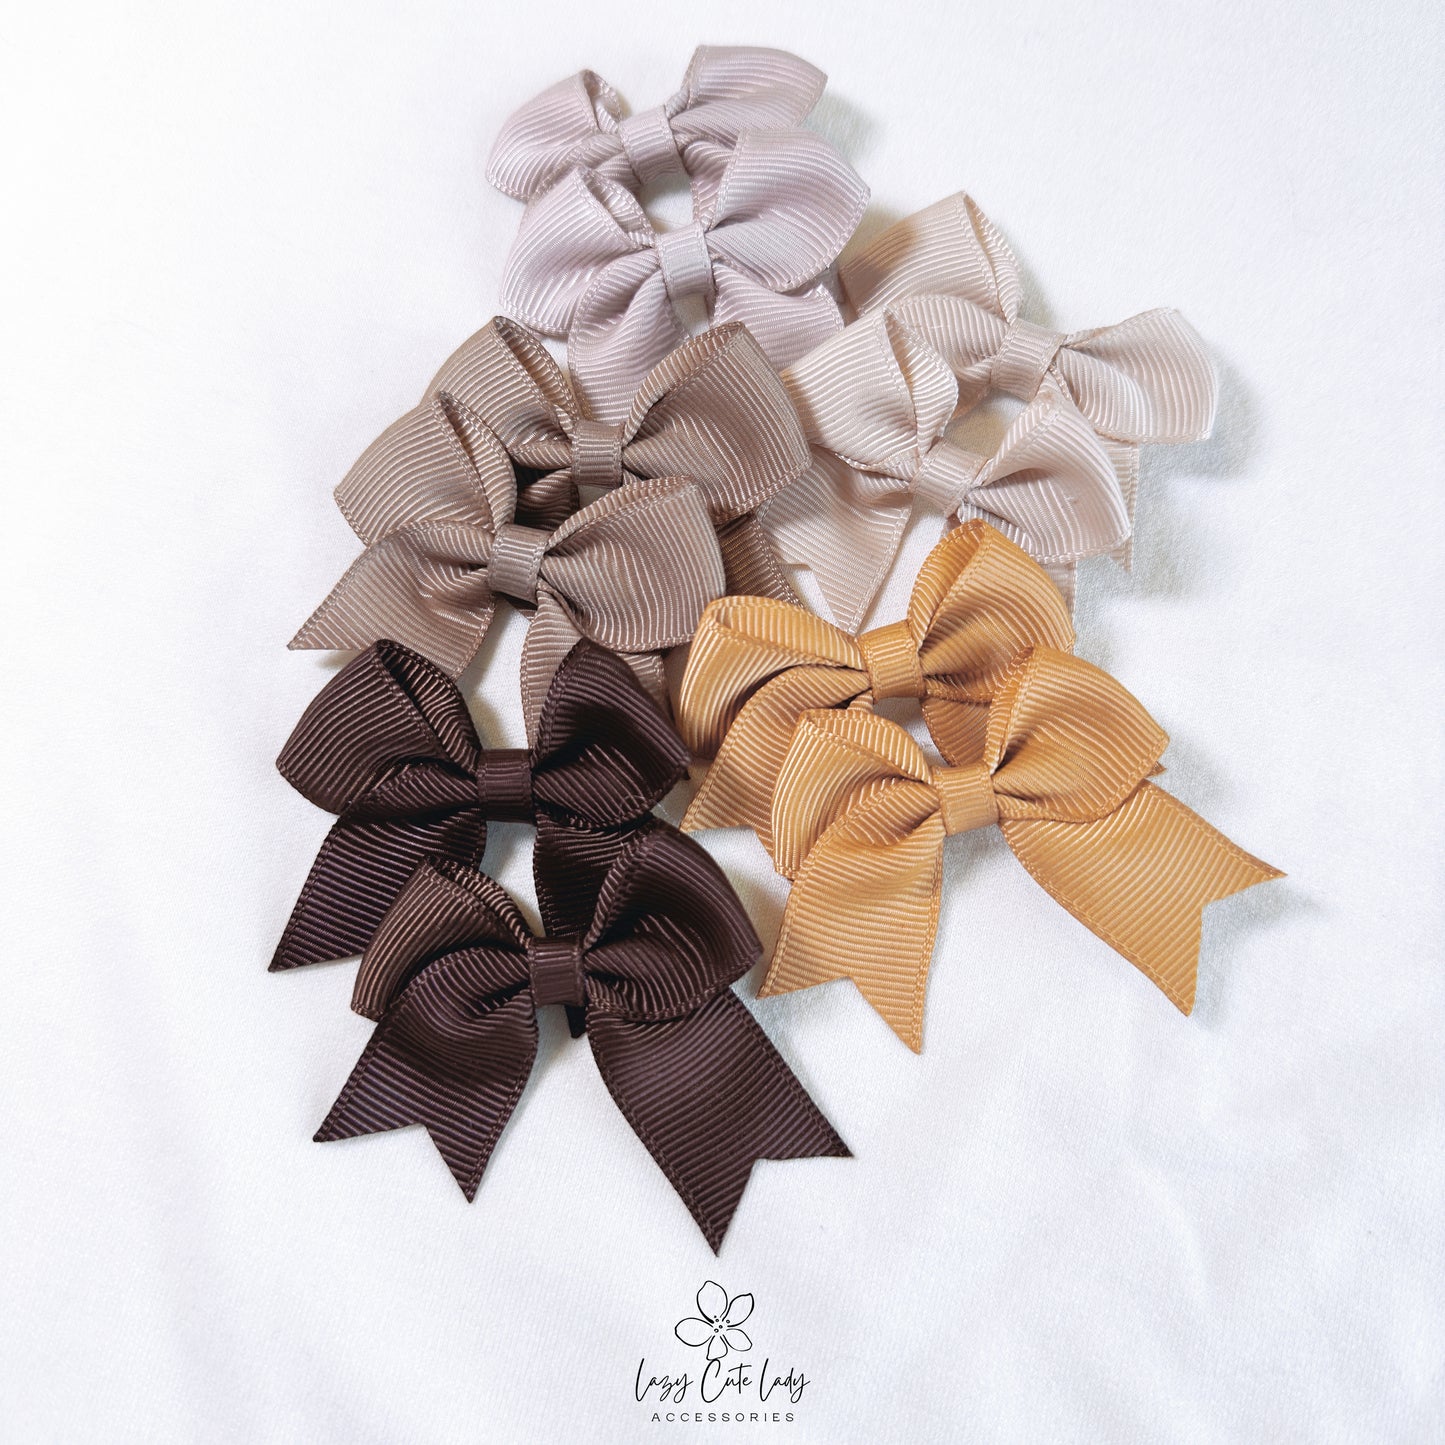 Mini Bow Hair Clips Set – Cute and Versatile - Baby Hair Accessory- 15 different colors